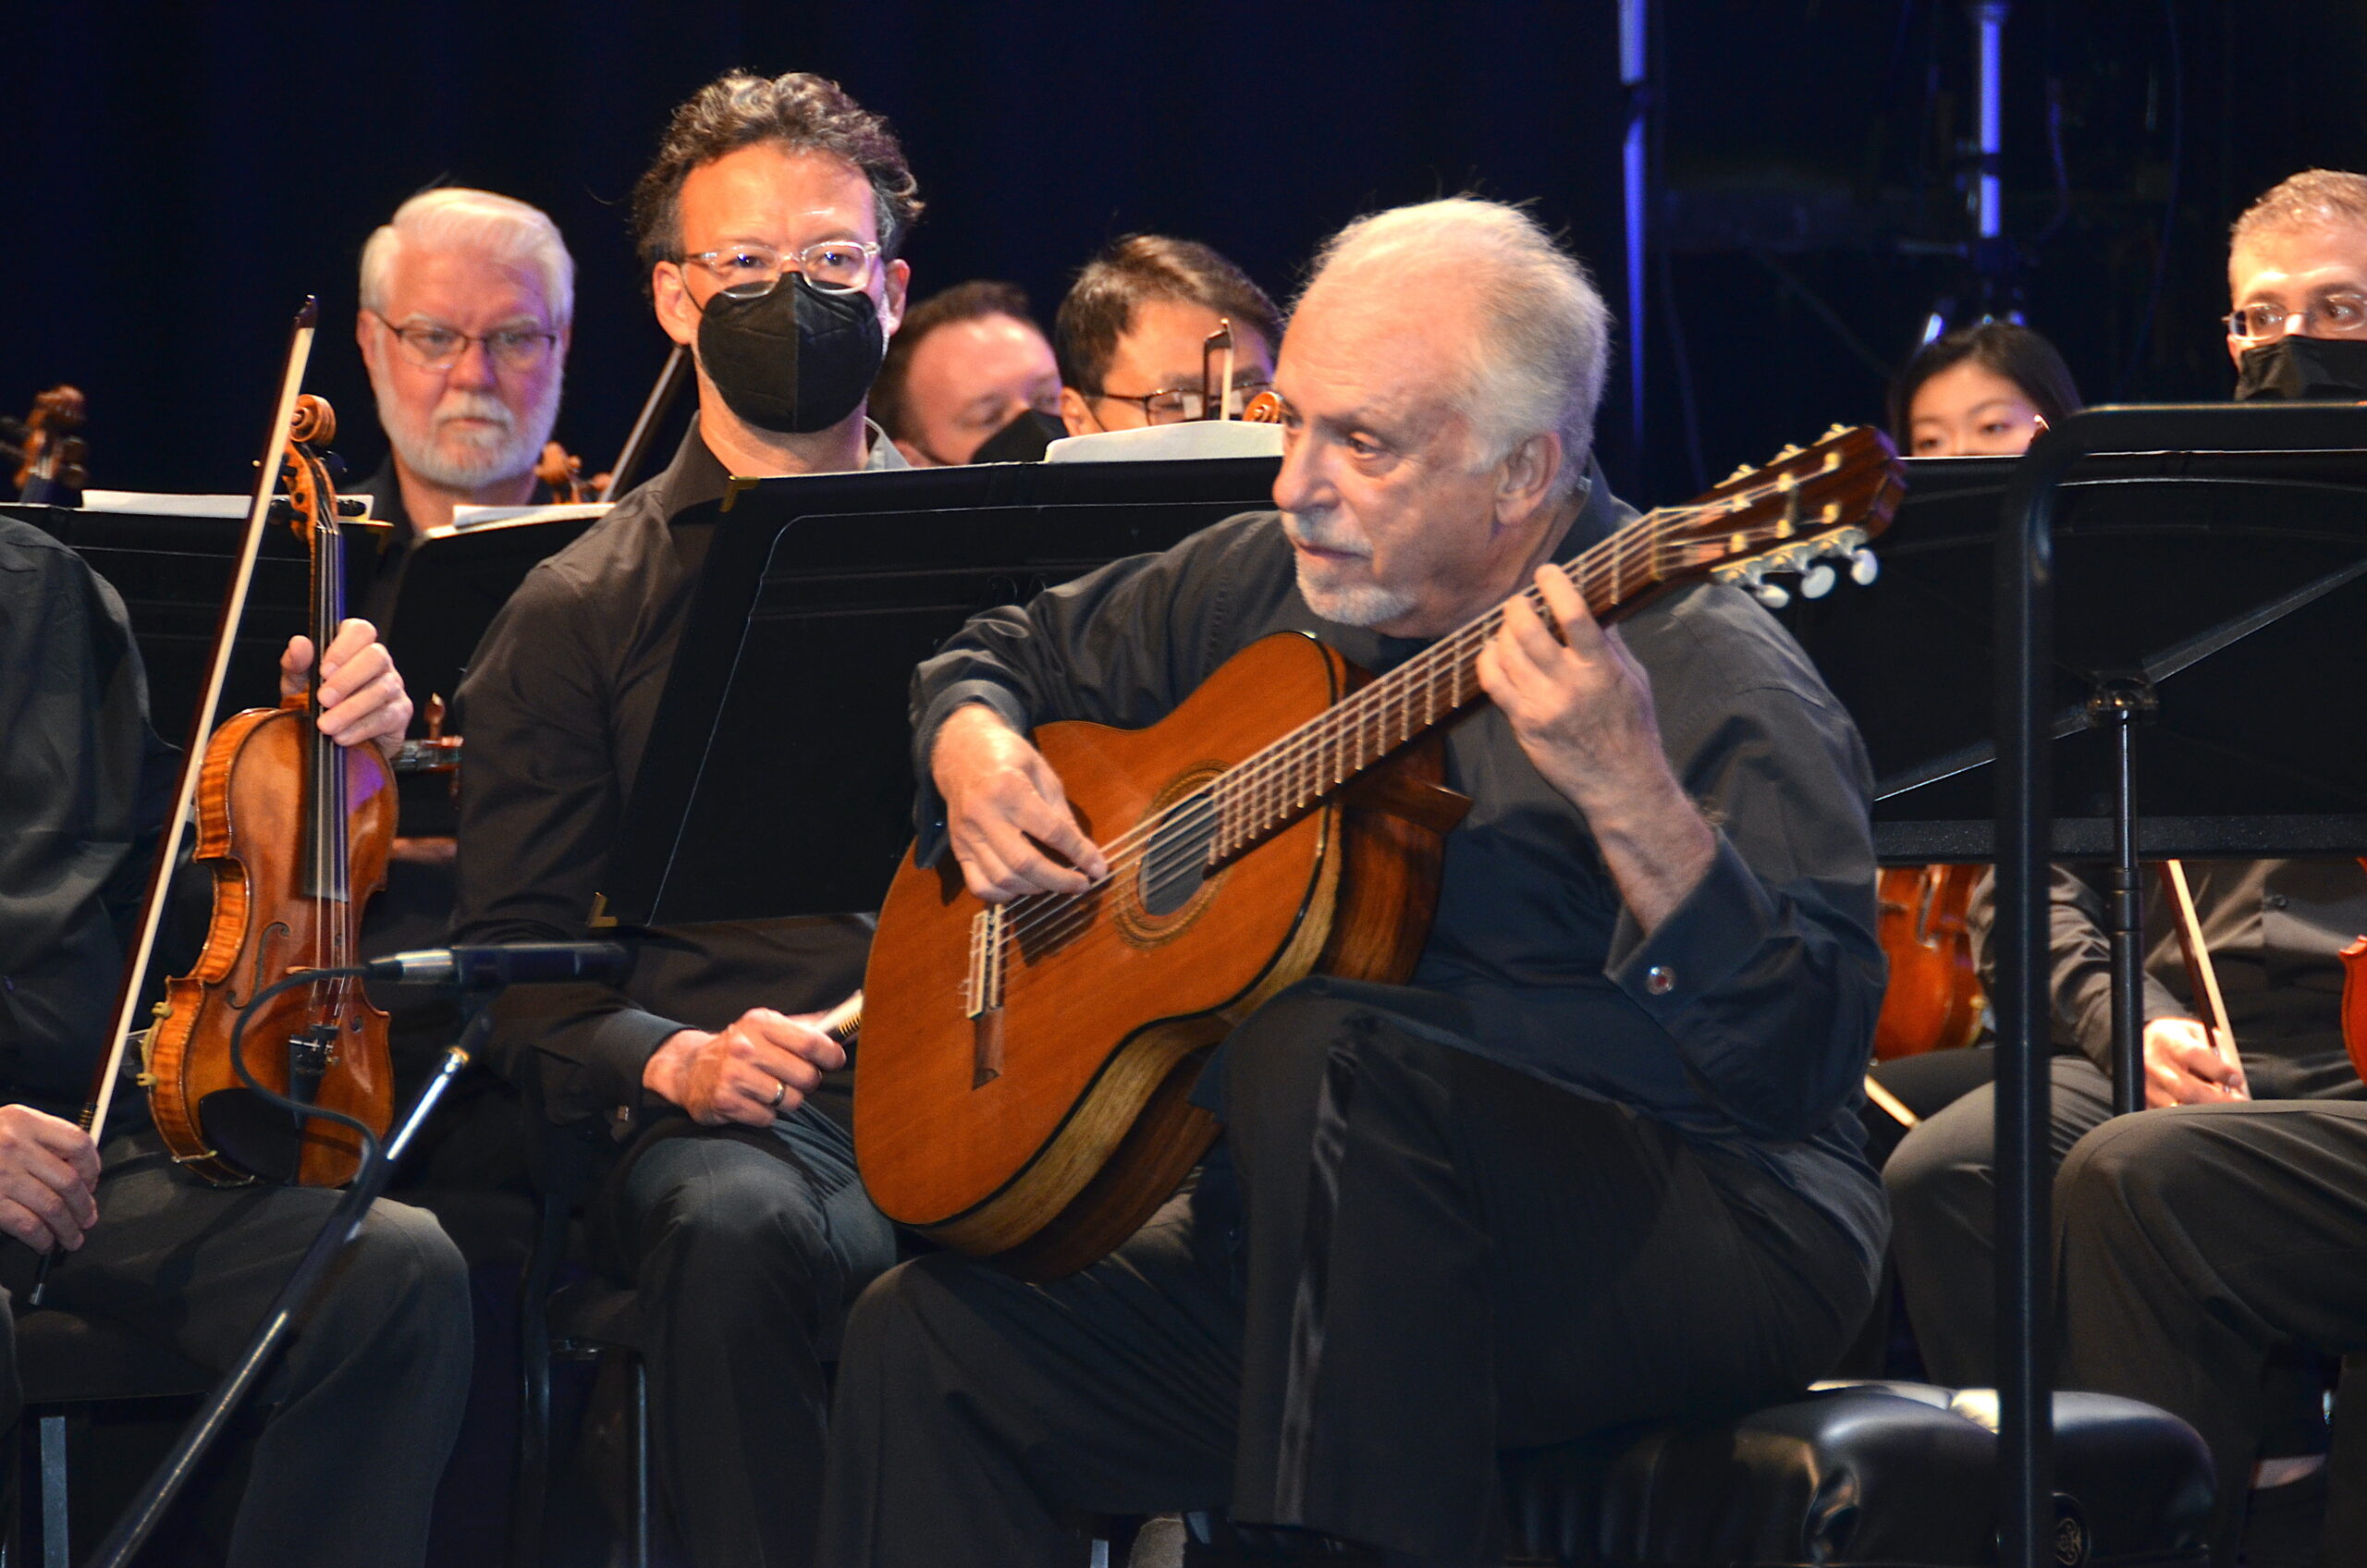 A performance by The Hamptons Festival of Music at LTV in September, 2022 featuring classical guitarist Pepe Romero, who will return as a guest artist at this year's festival. BARRY GORDIN